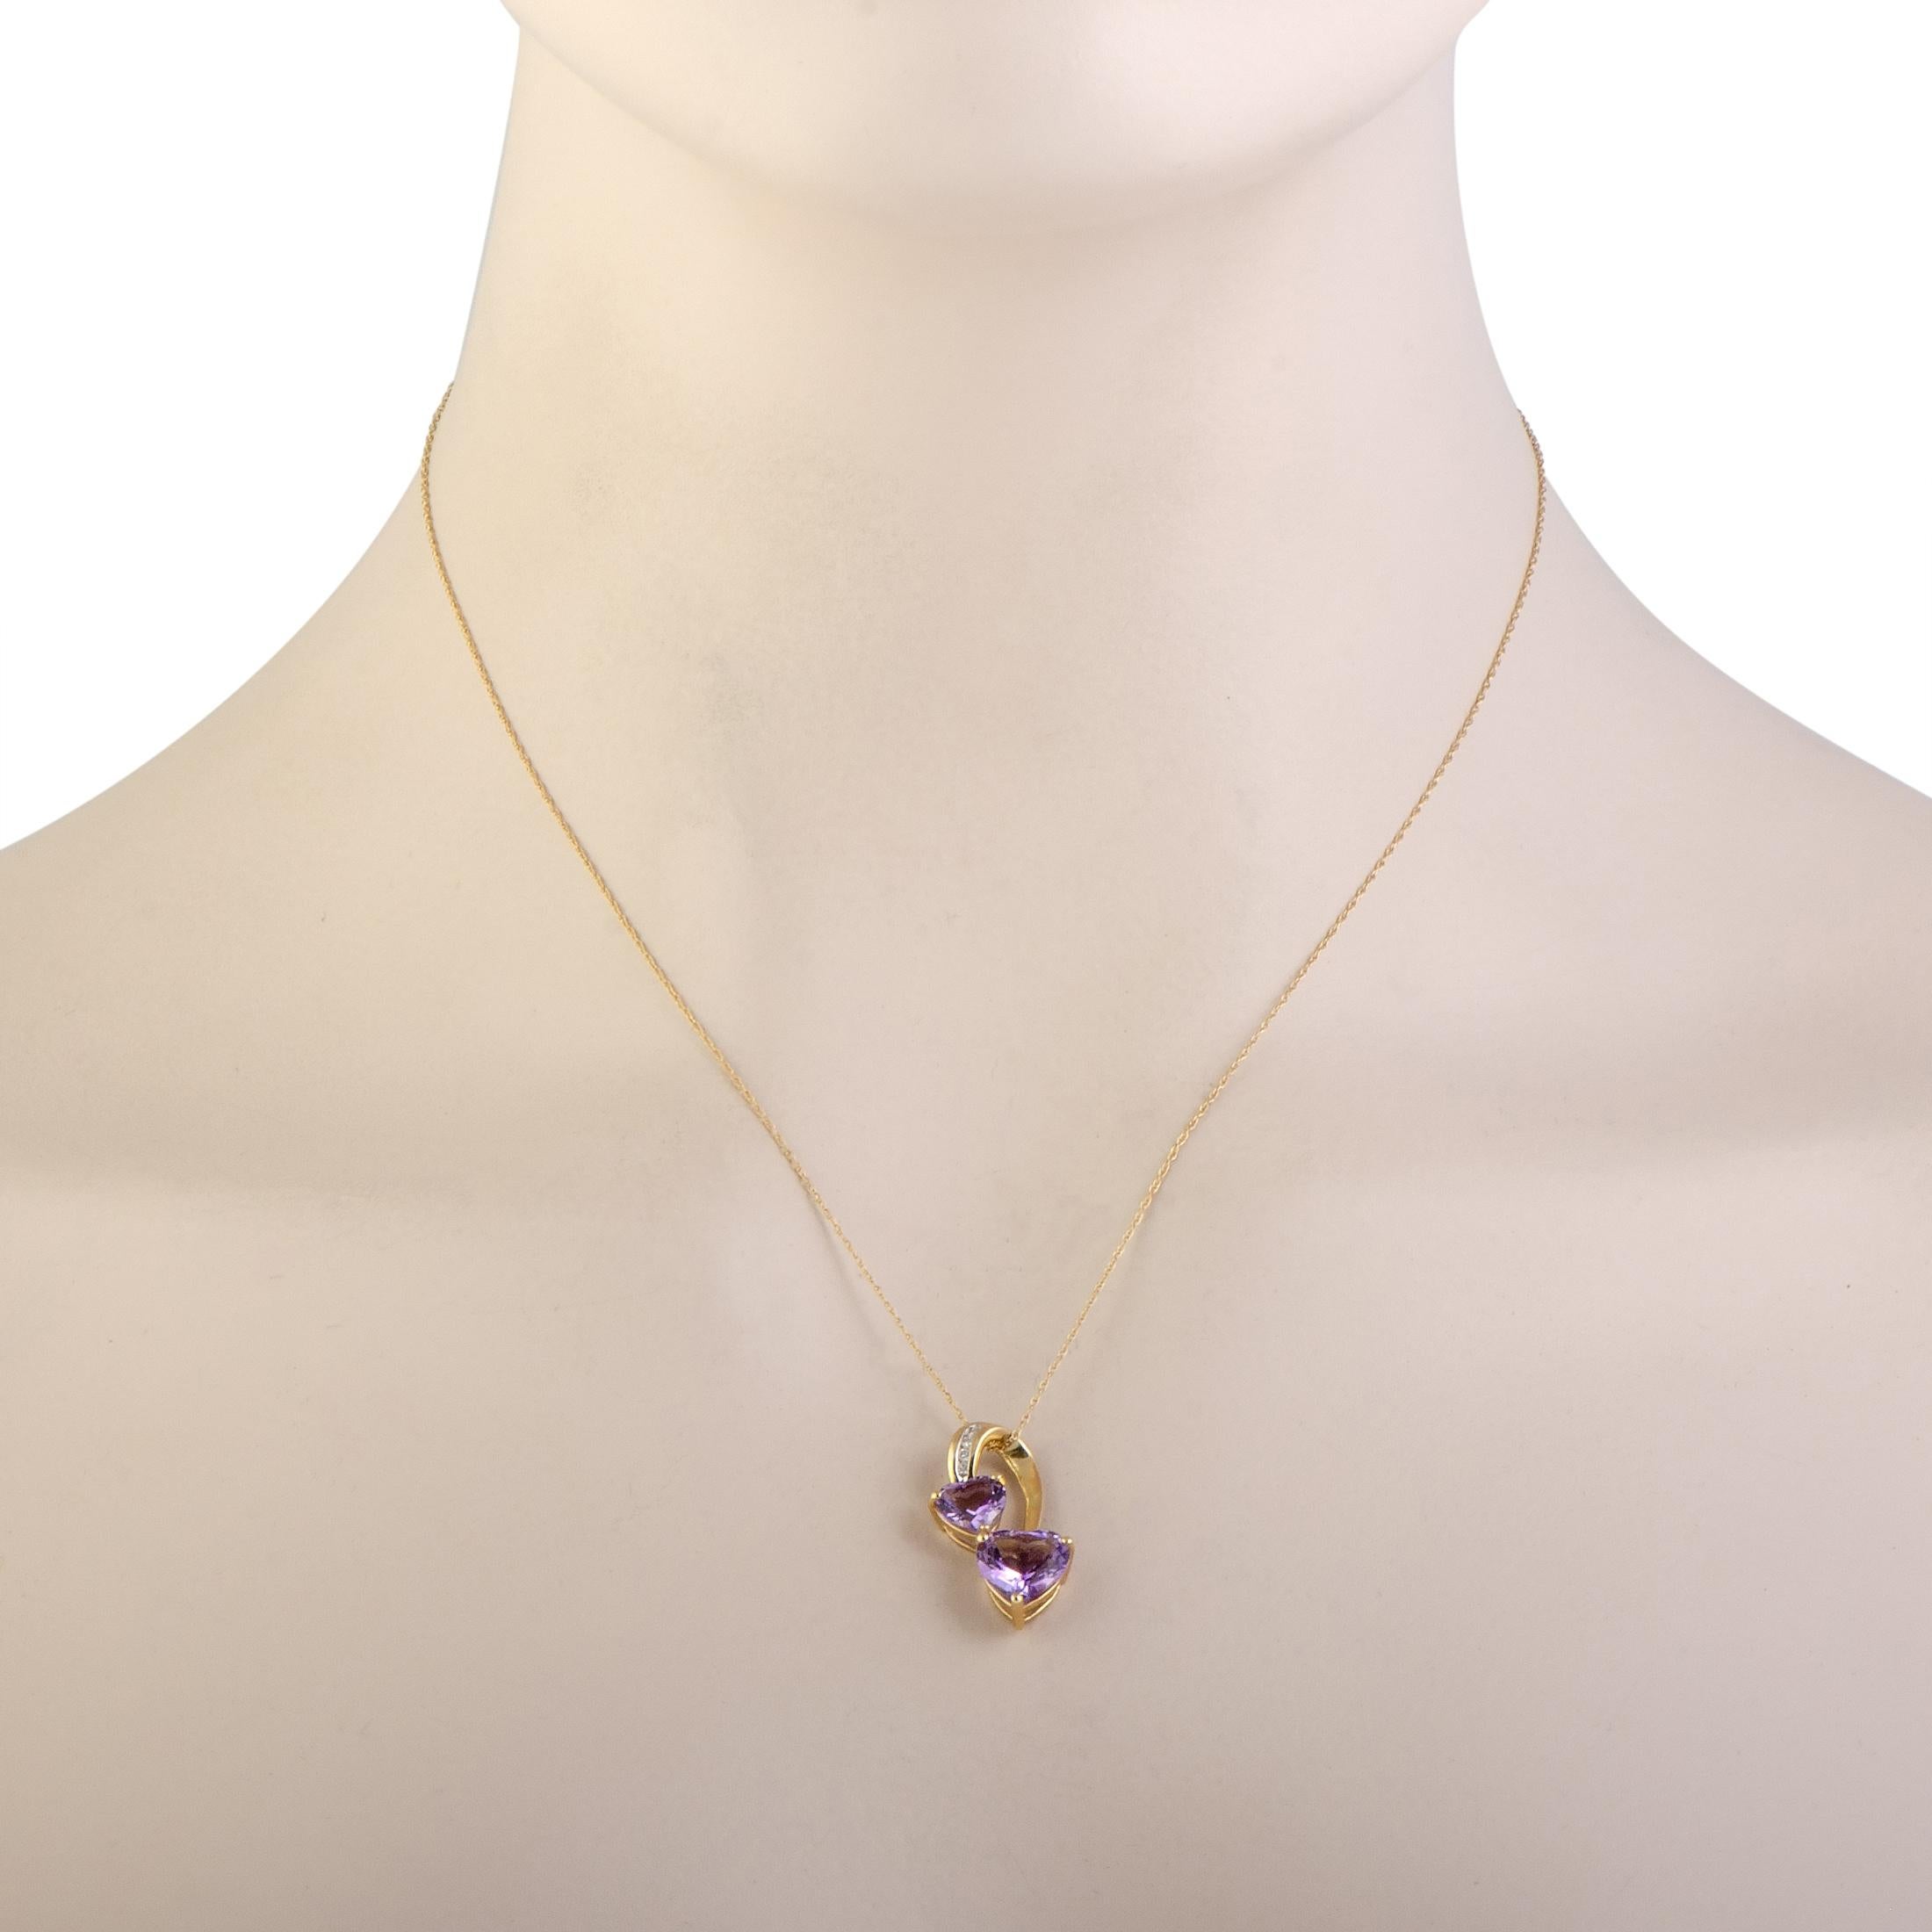 This precious 14K yellow gold necklace has a wonderful aesthetic effect created by impeccable craftsmanship. The pendant's adorably elegant design is adorned with 0.04ct of scintillating diamonds and mesmerizing heart-shaped amethyst stones that